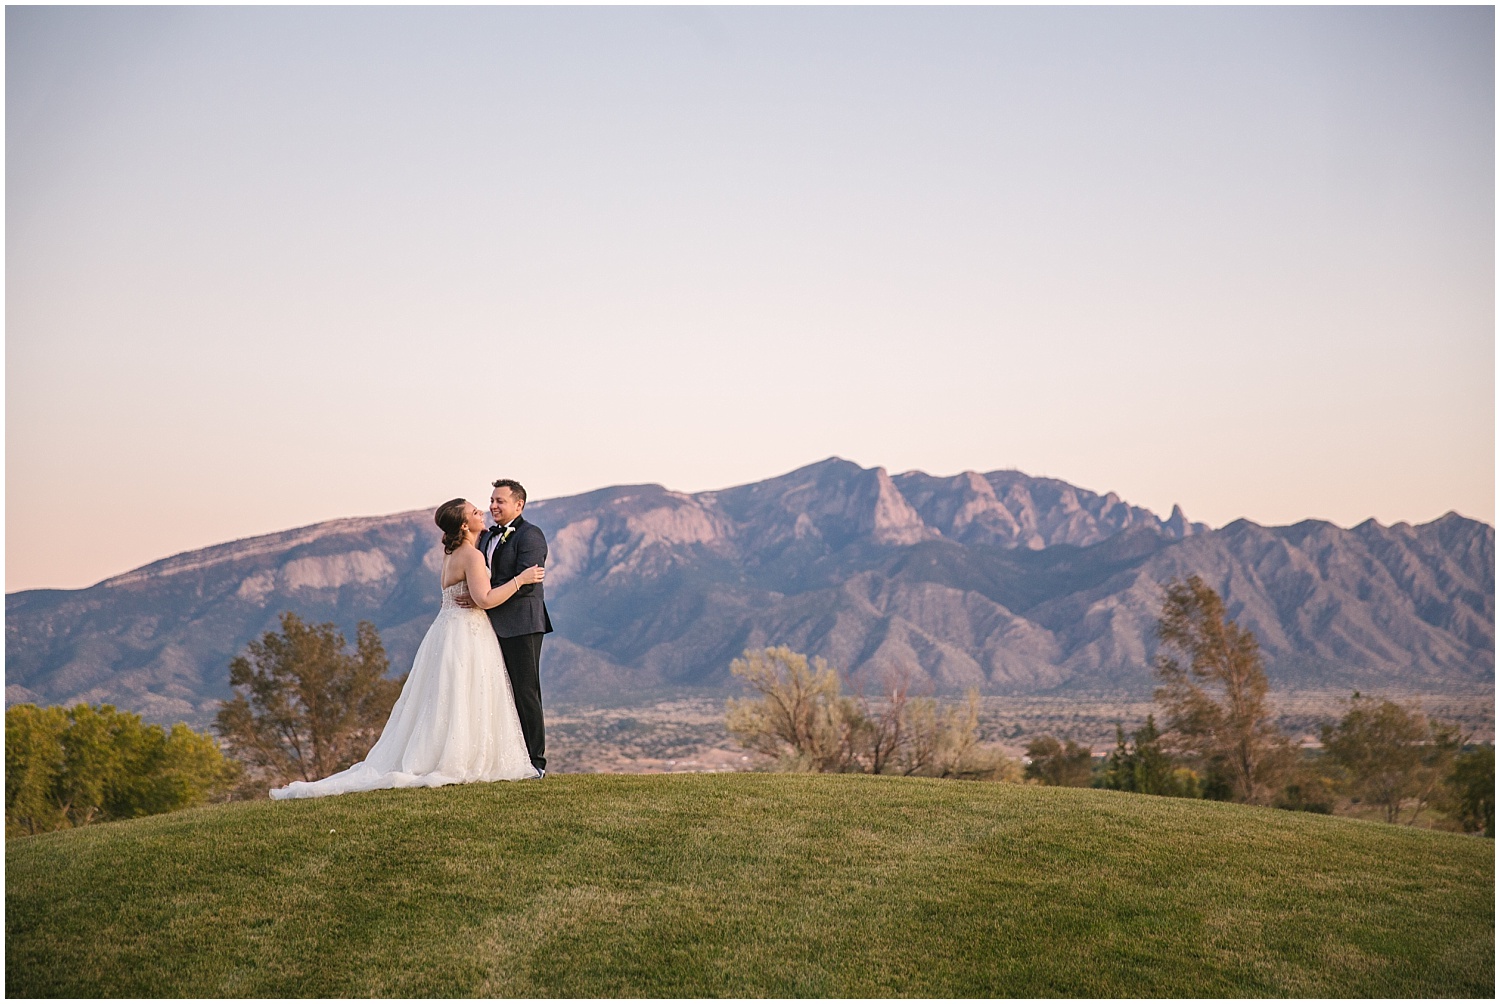 Bride and groom portraits in front of the Sandia Mountains at sunset at Prairie Star Restaurant wedding